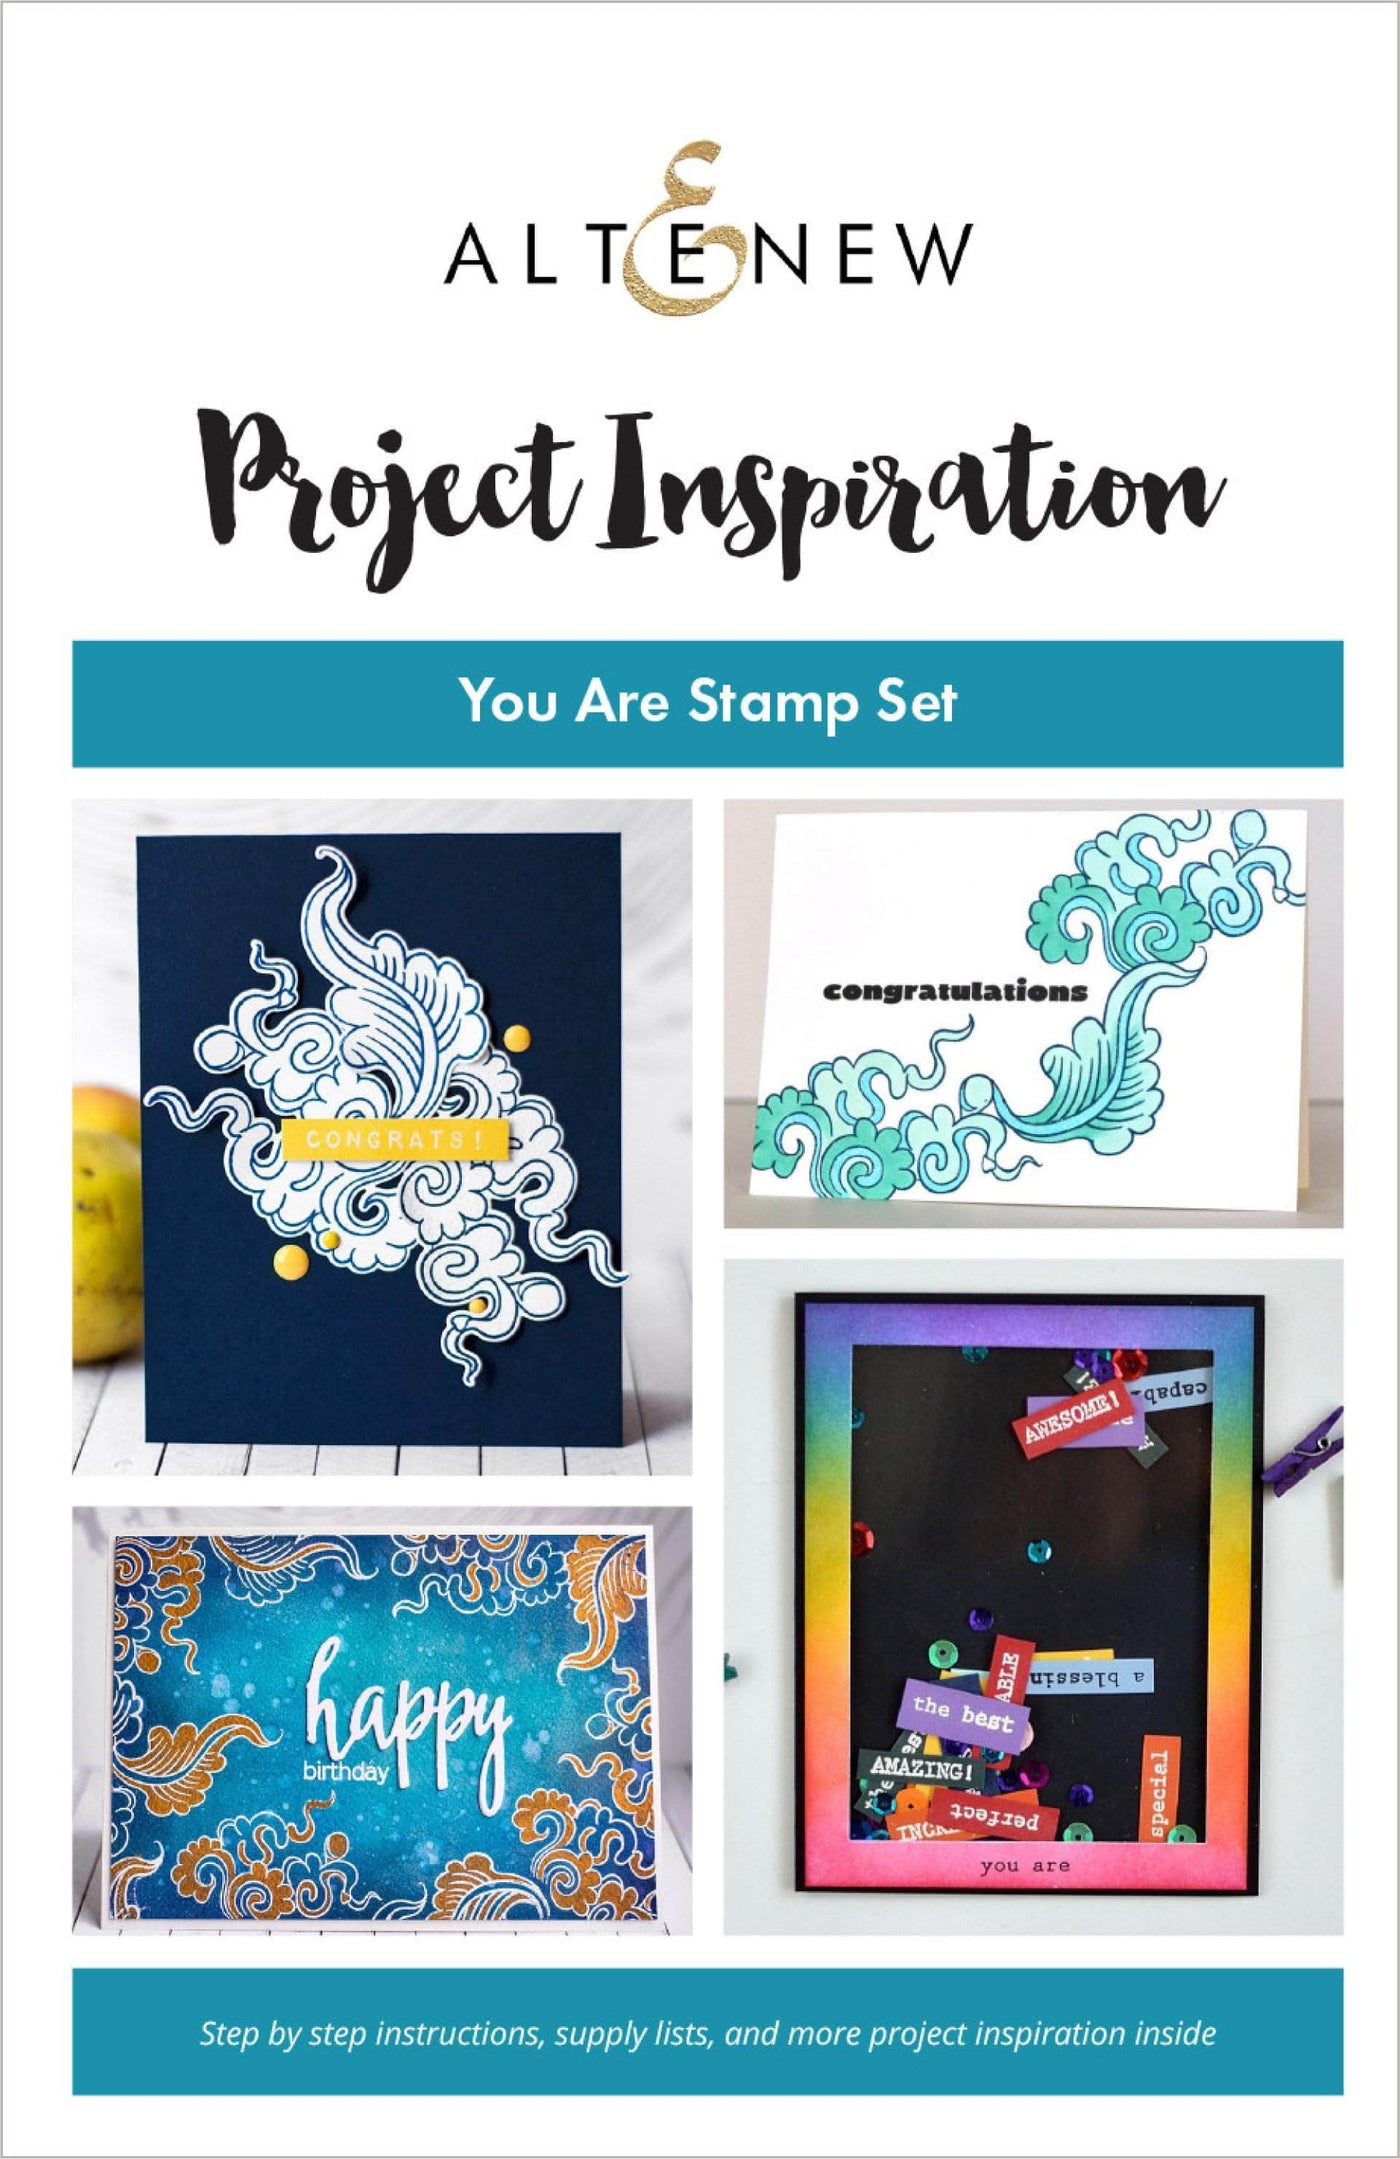 Printed Media You Are... Inspiration Guide